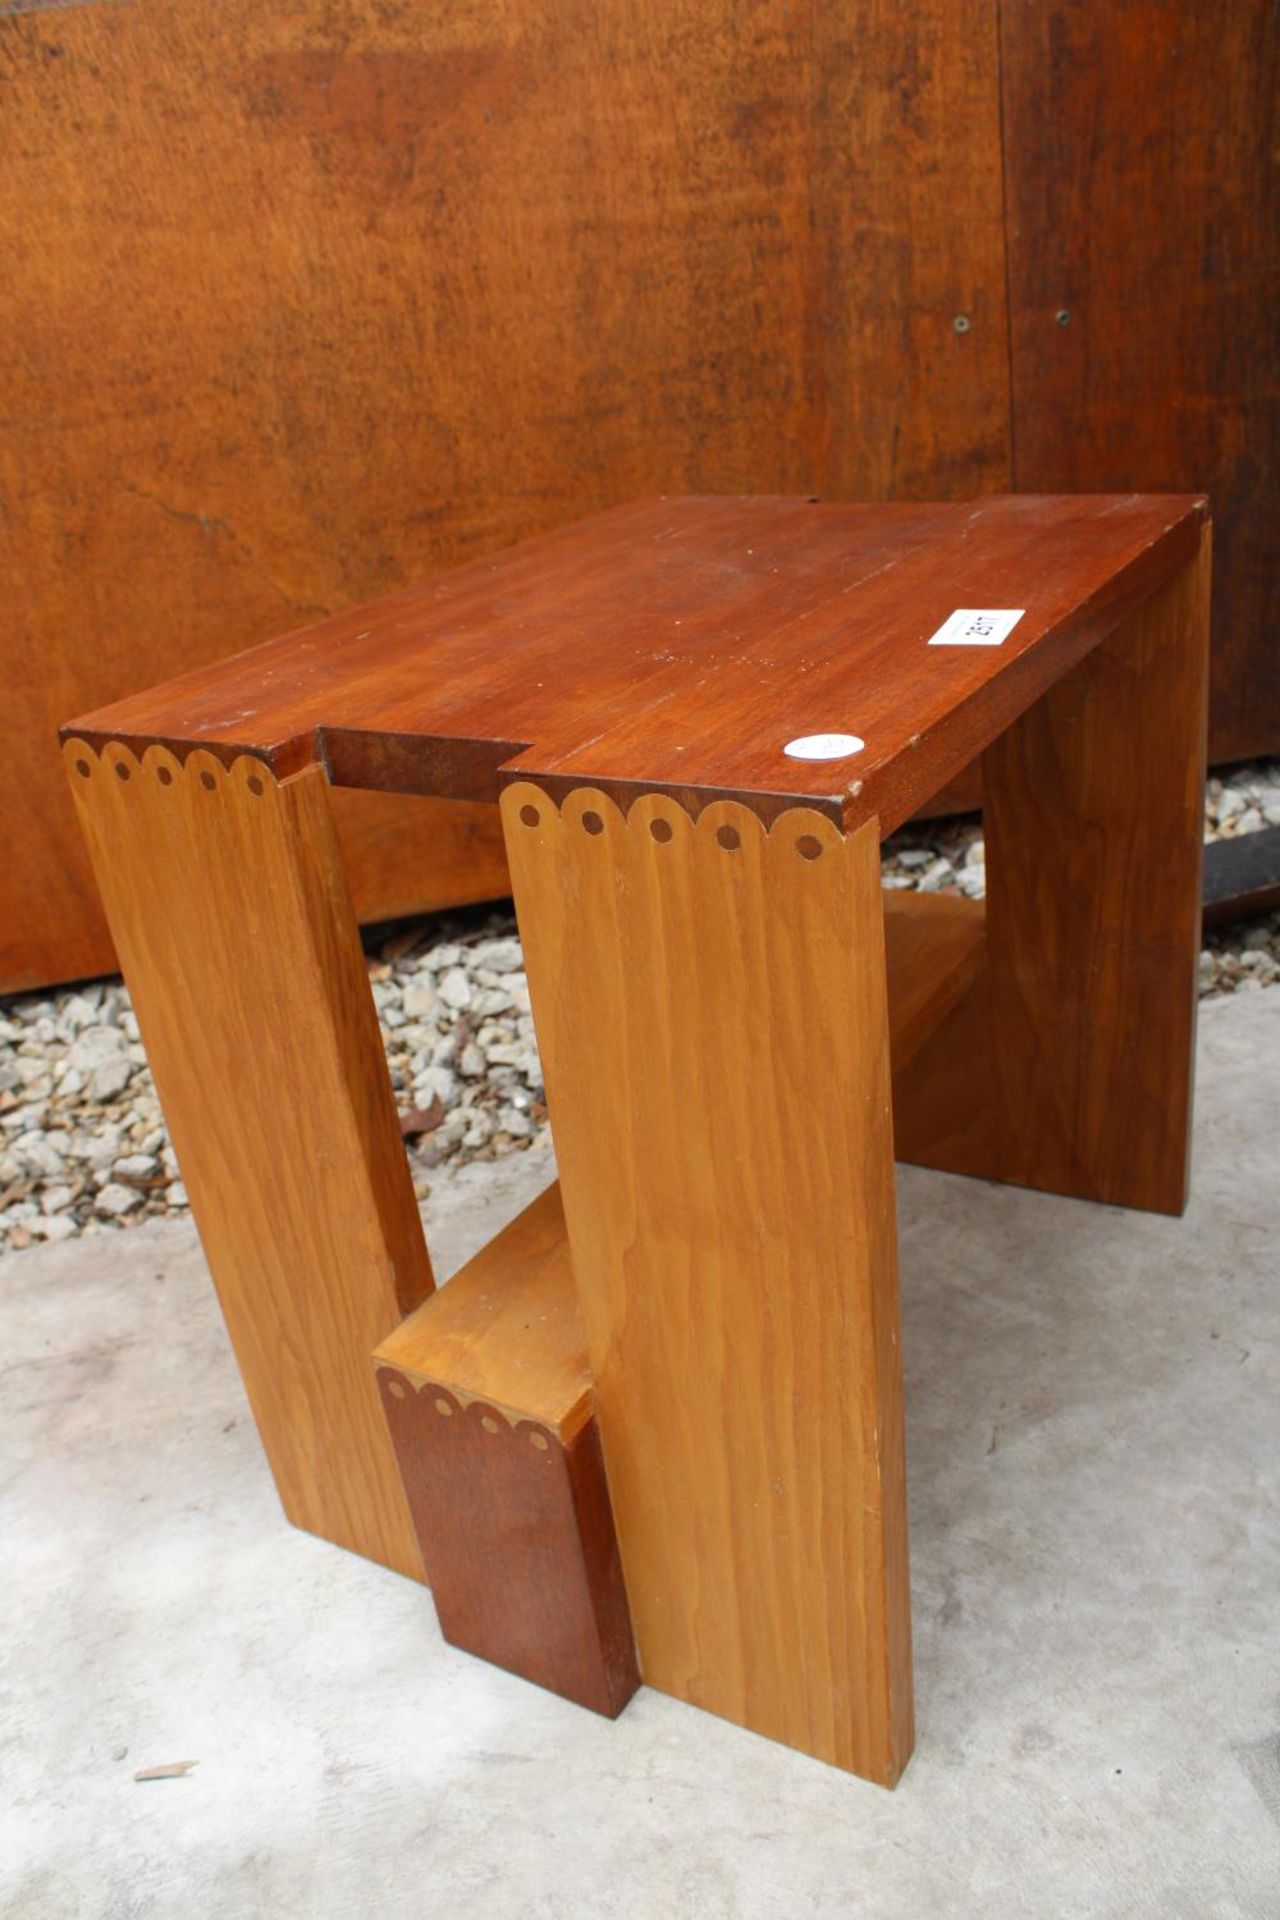 A BEECH AND MAHOGANY GORDON WARR STOOL, SEE ARTICLE IN 1983 WOOD WORKING MAGAZINE AND A SIMILAR LAMP - Image 3 of 7